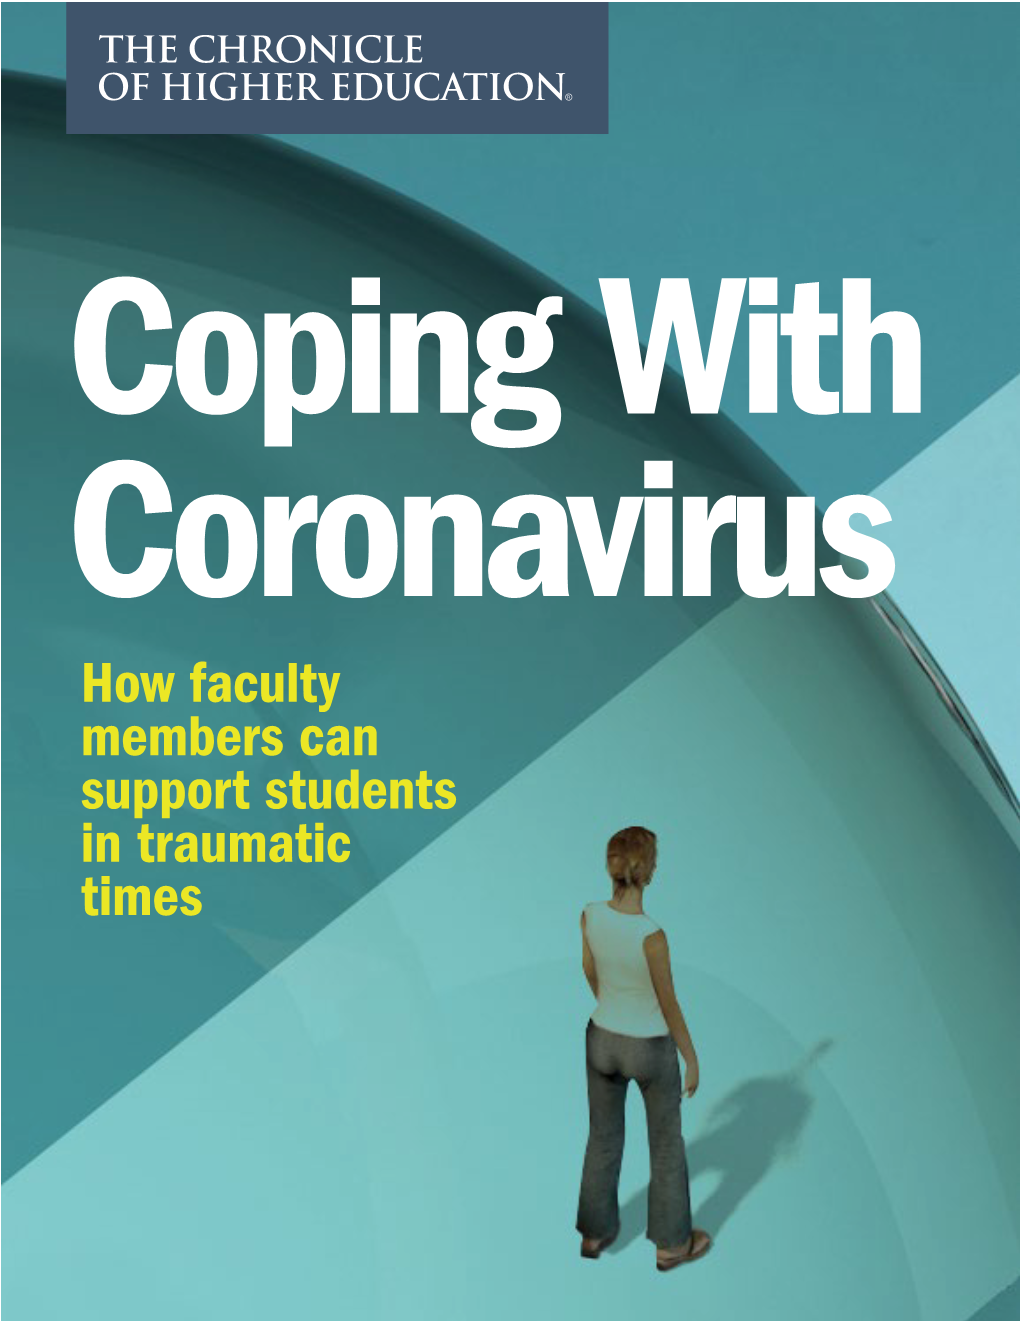 How Faculty Members Can Support Students in Traumatic Times Veryone Is Under Stress Trying to Cope with the Nov- Members Can Help Students Cope